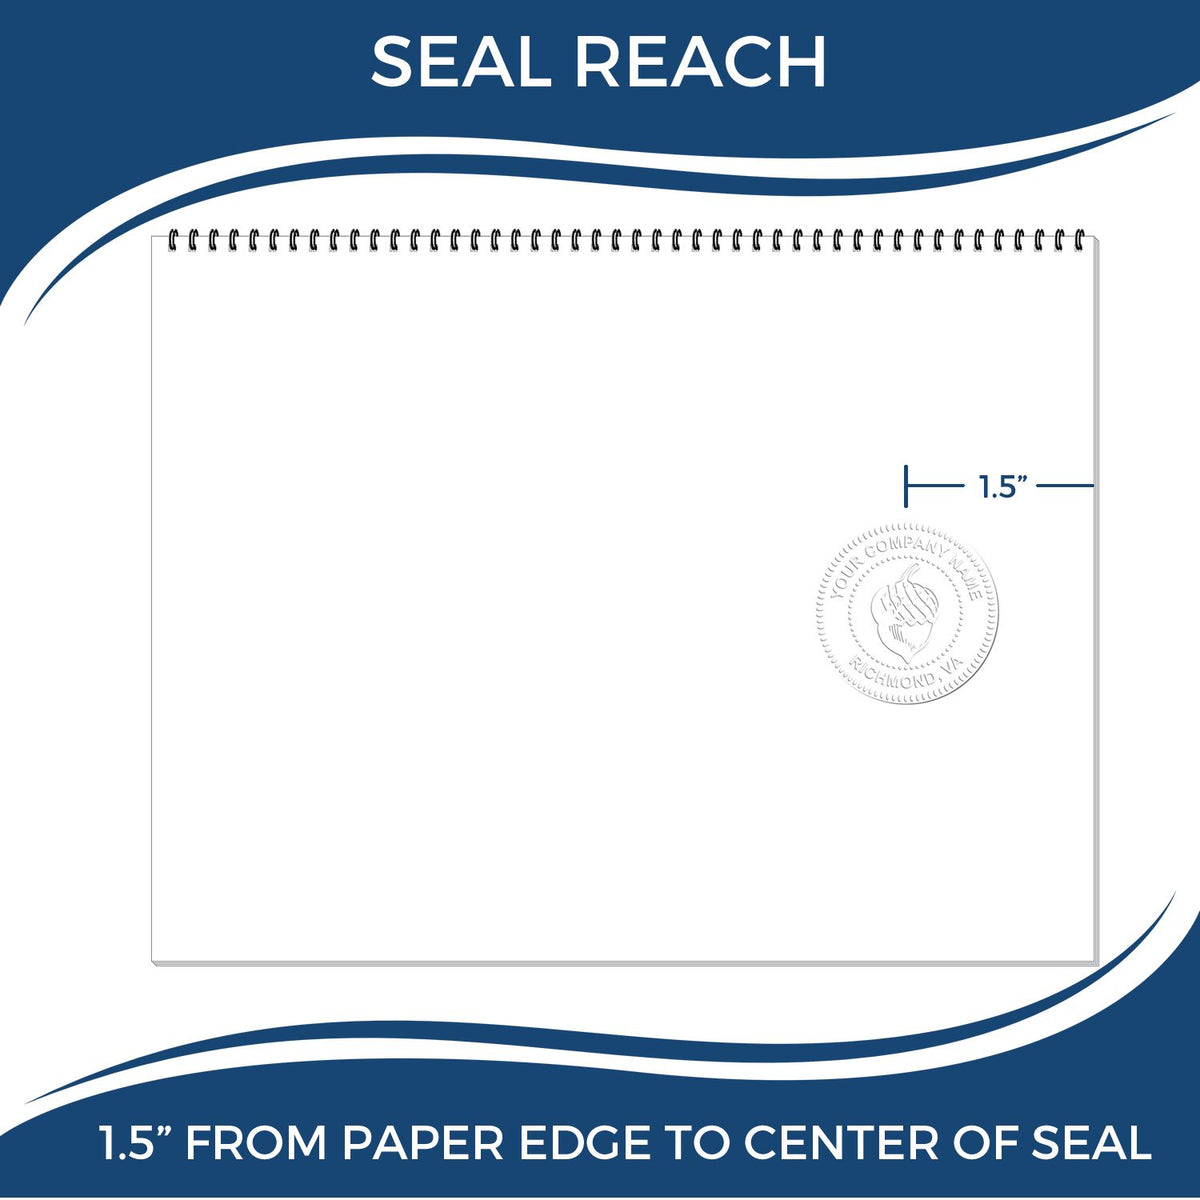 An infographic showing the seal reach which is represented by a ruler and a miniature seal image of the Gift Florida Land Surveyor Seal